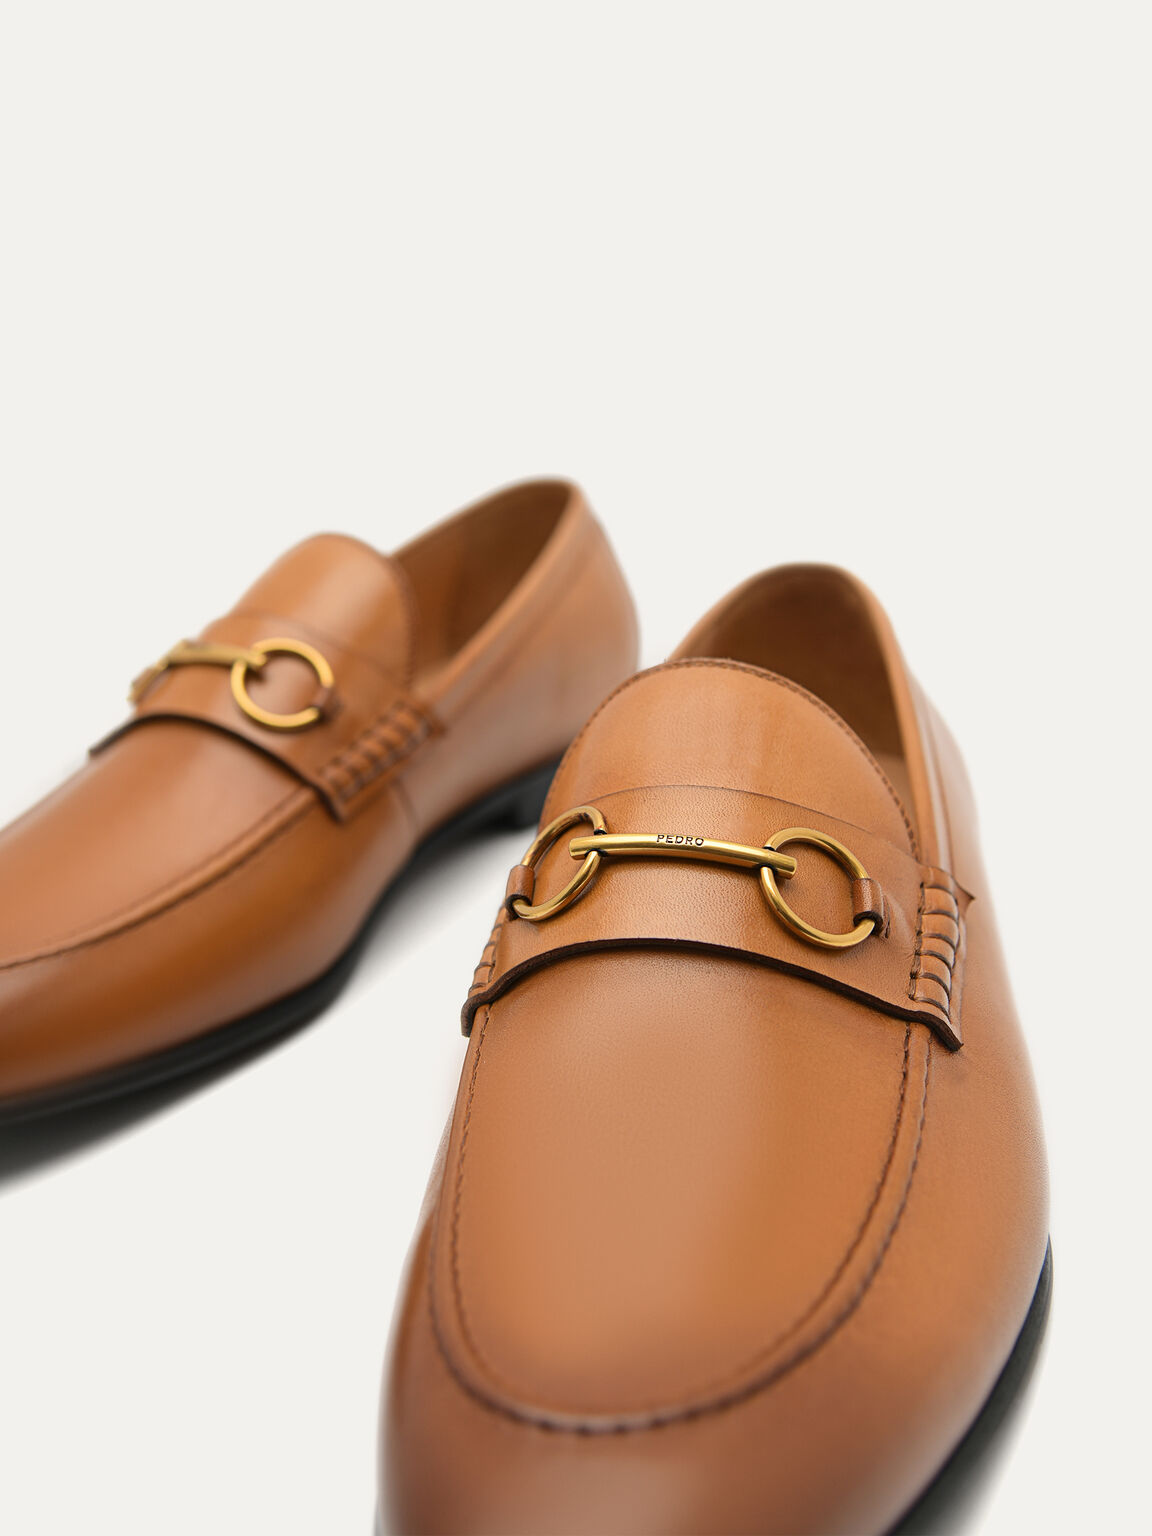 Gable Leather Loafers, Camel